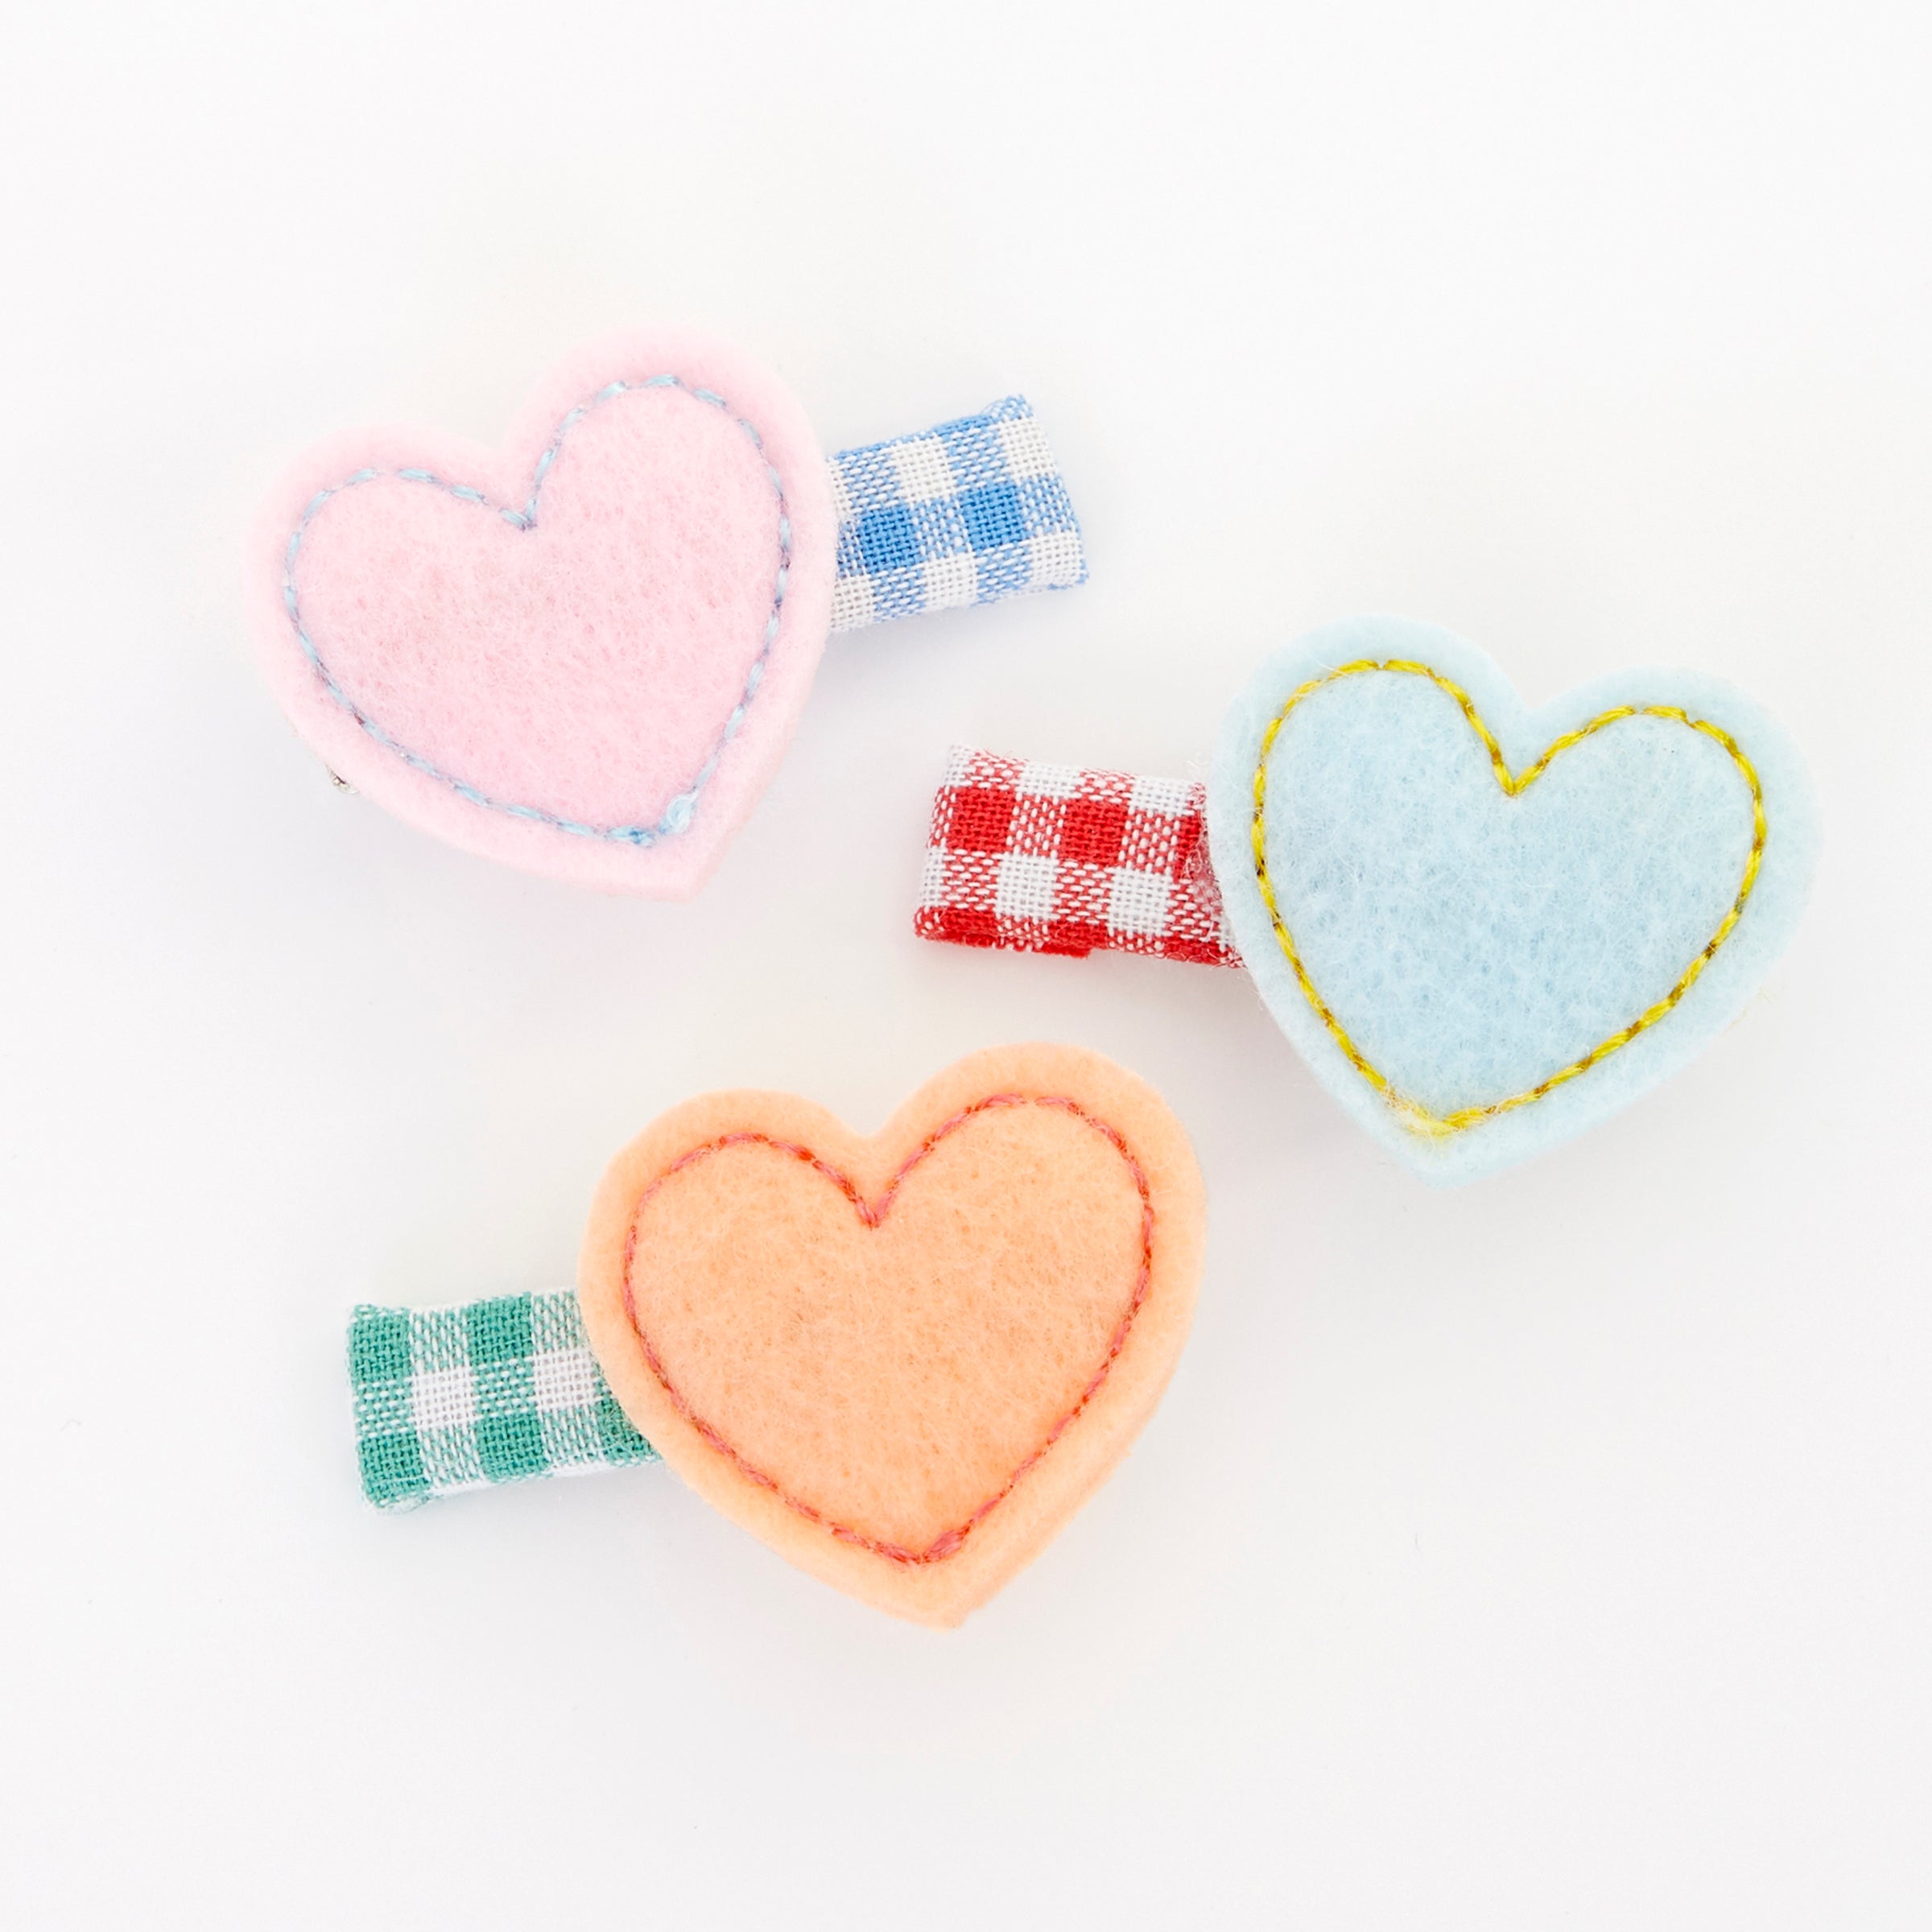 Our hair accessories for kids set includes colorful hearts and gingham ribbons, perfect for Valentine's Day gifts for kids.